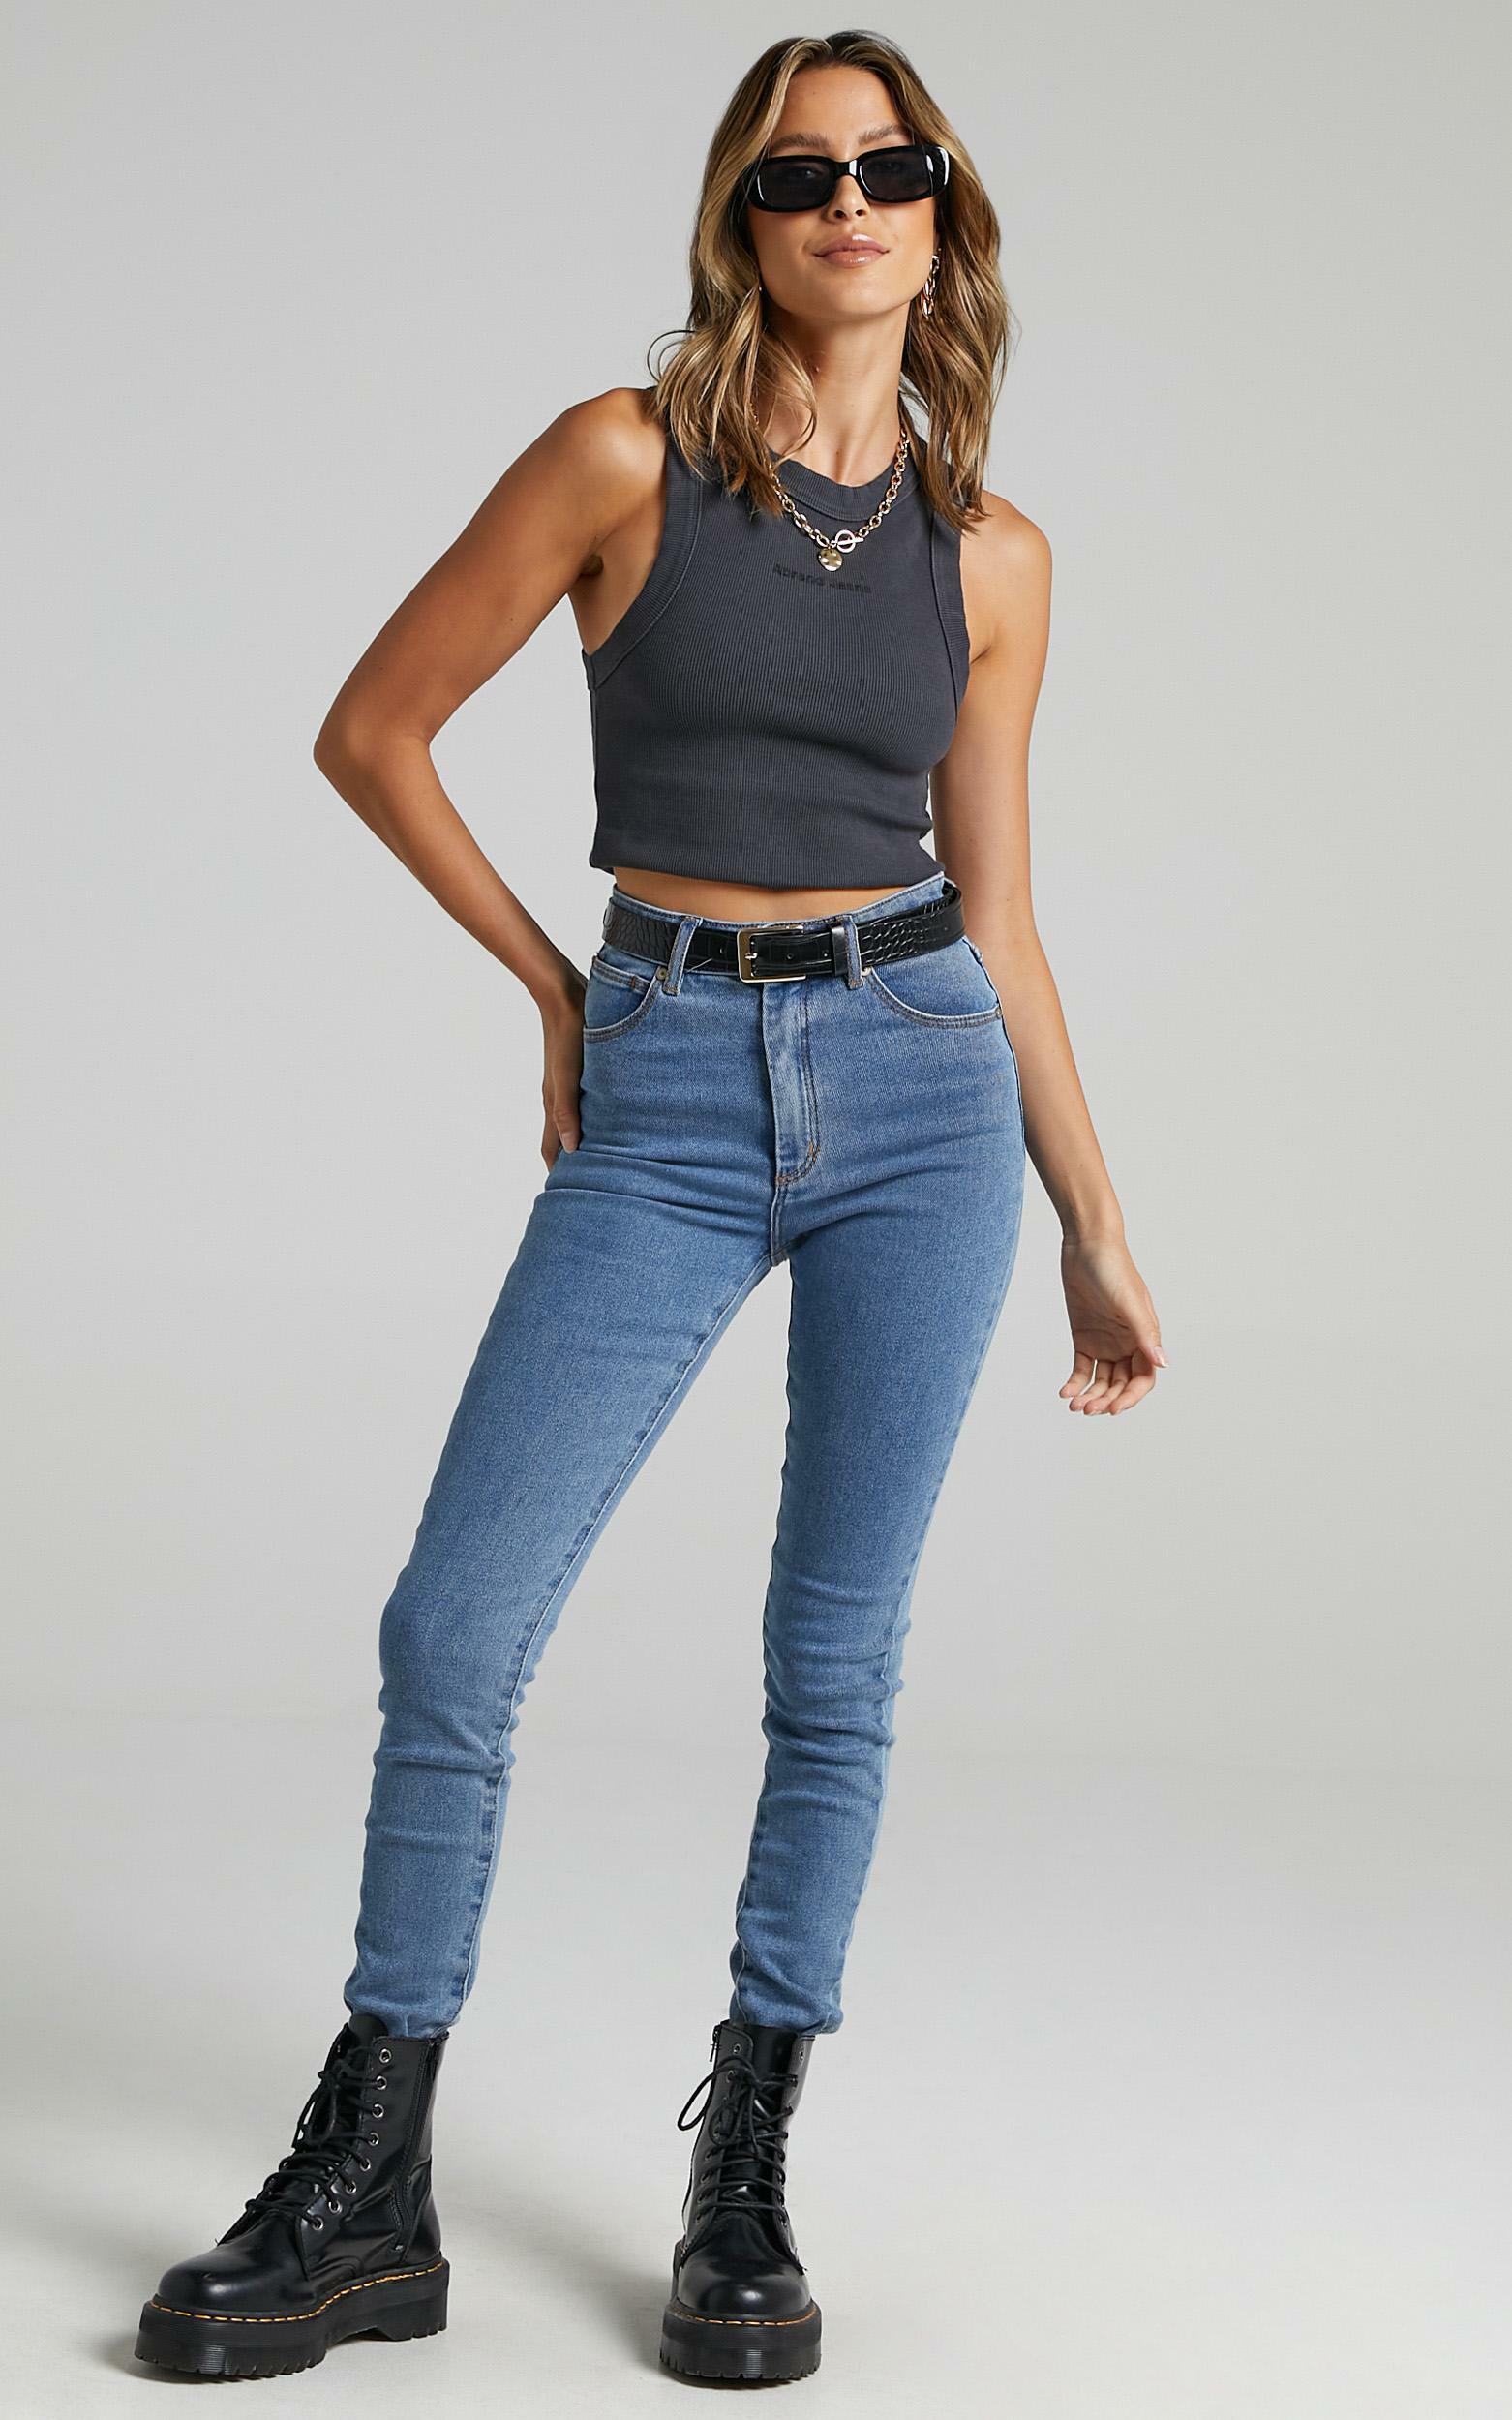 Abrand - A High Skinny Ankle Basher Jean in La Blues - 06, BLU1, hi-res image number null